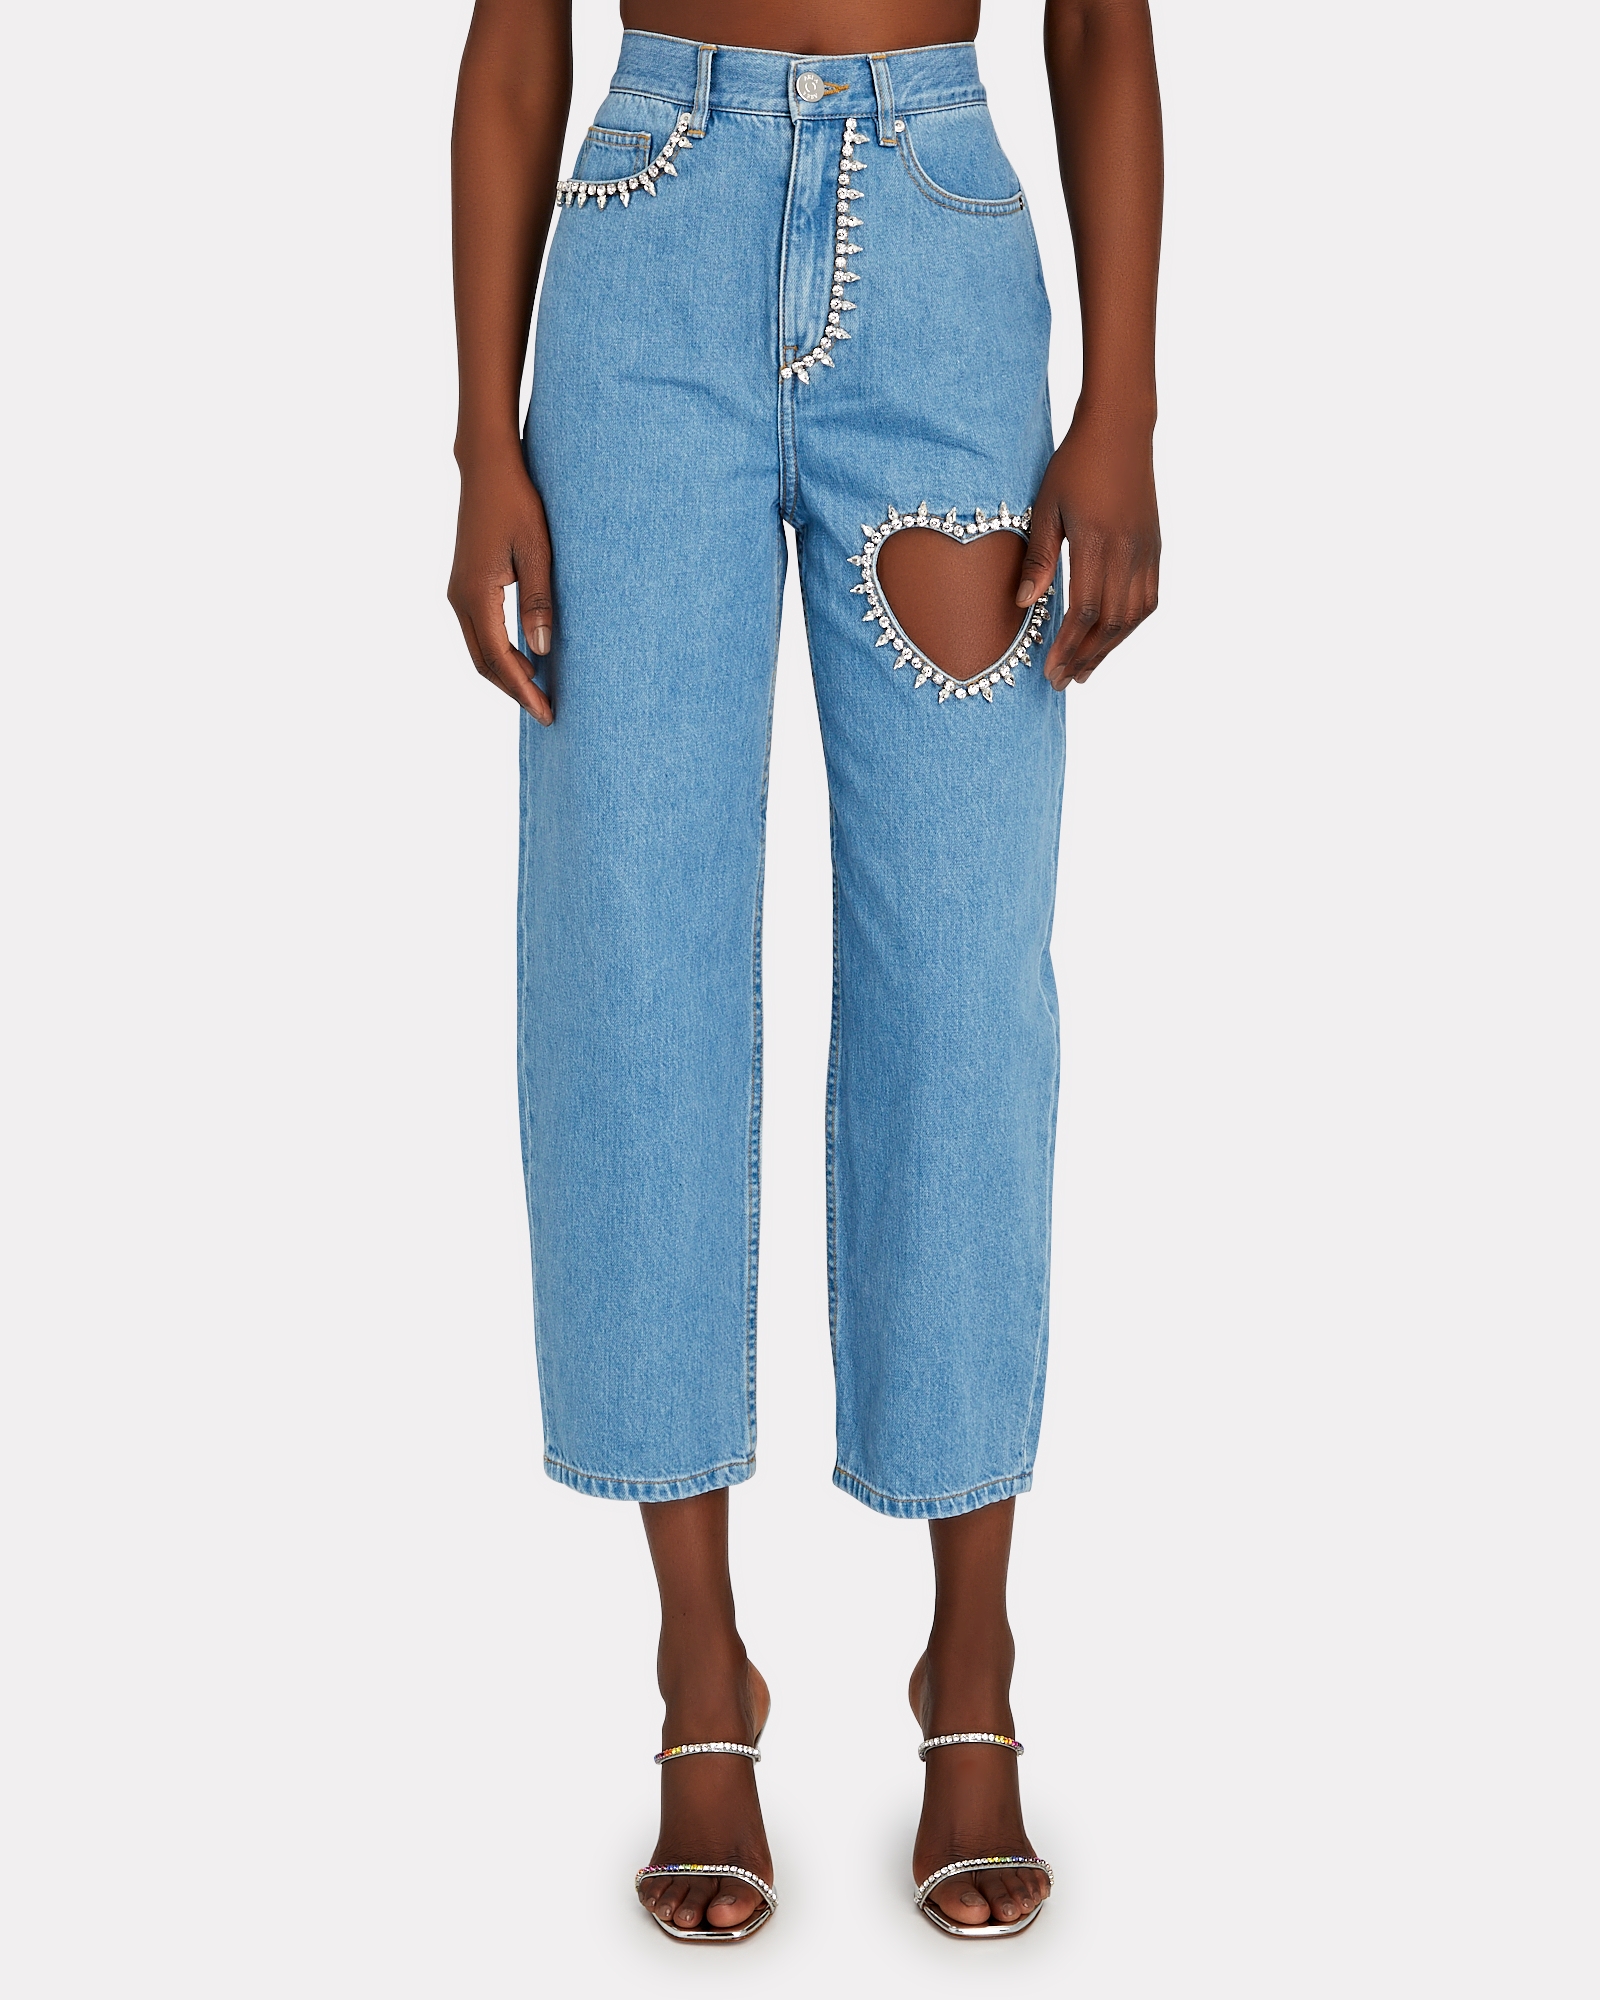 AREA Crystal-Embellished Heart Jeans | INTERMIX®